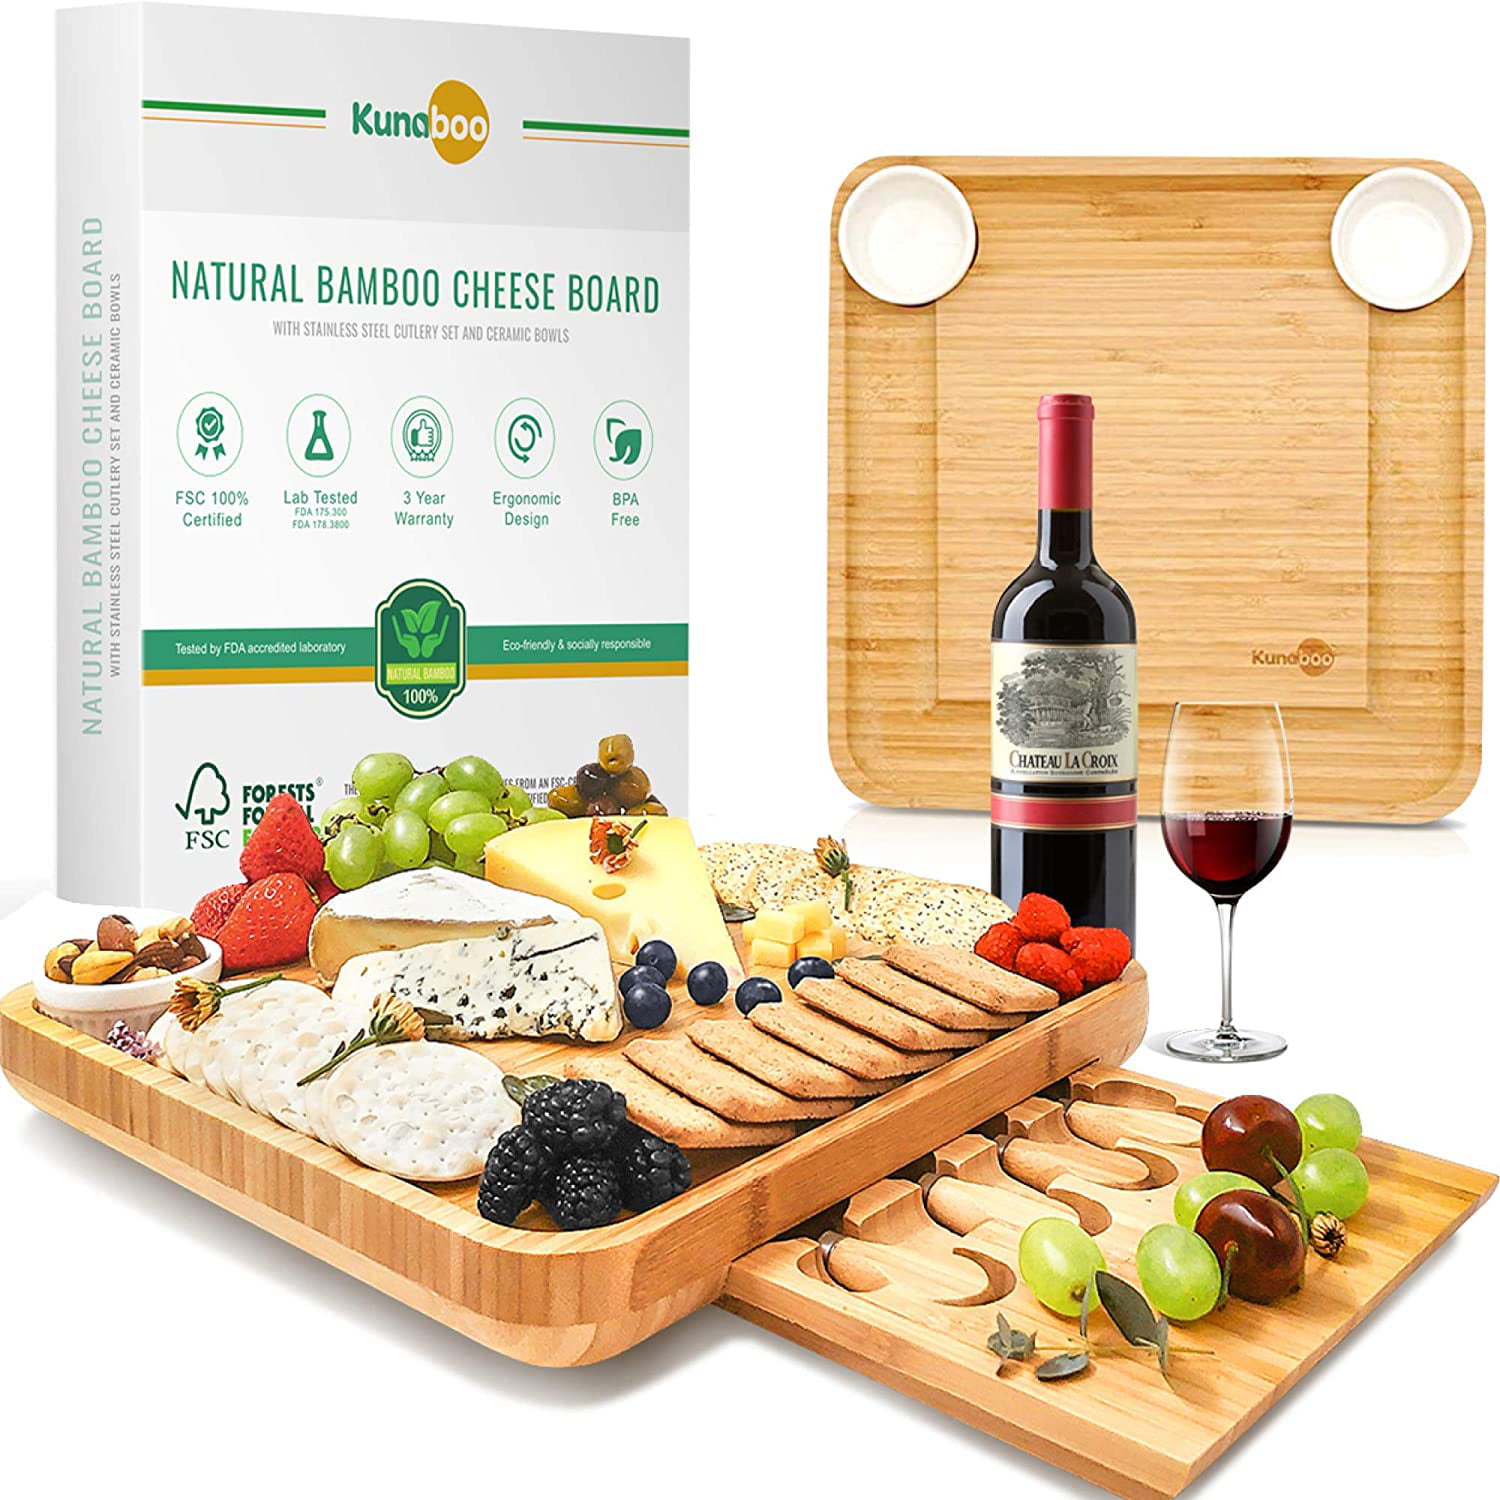 Belmint MAT-CB2 Bamboo Cheese Board with Cutlery Set for sale online 